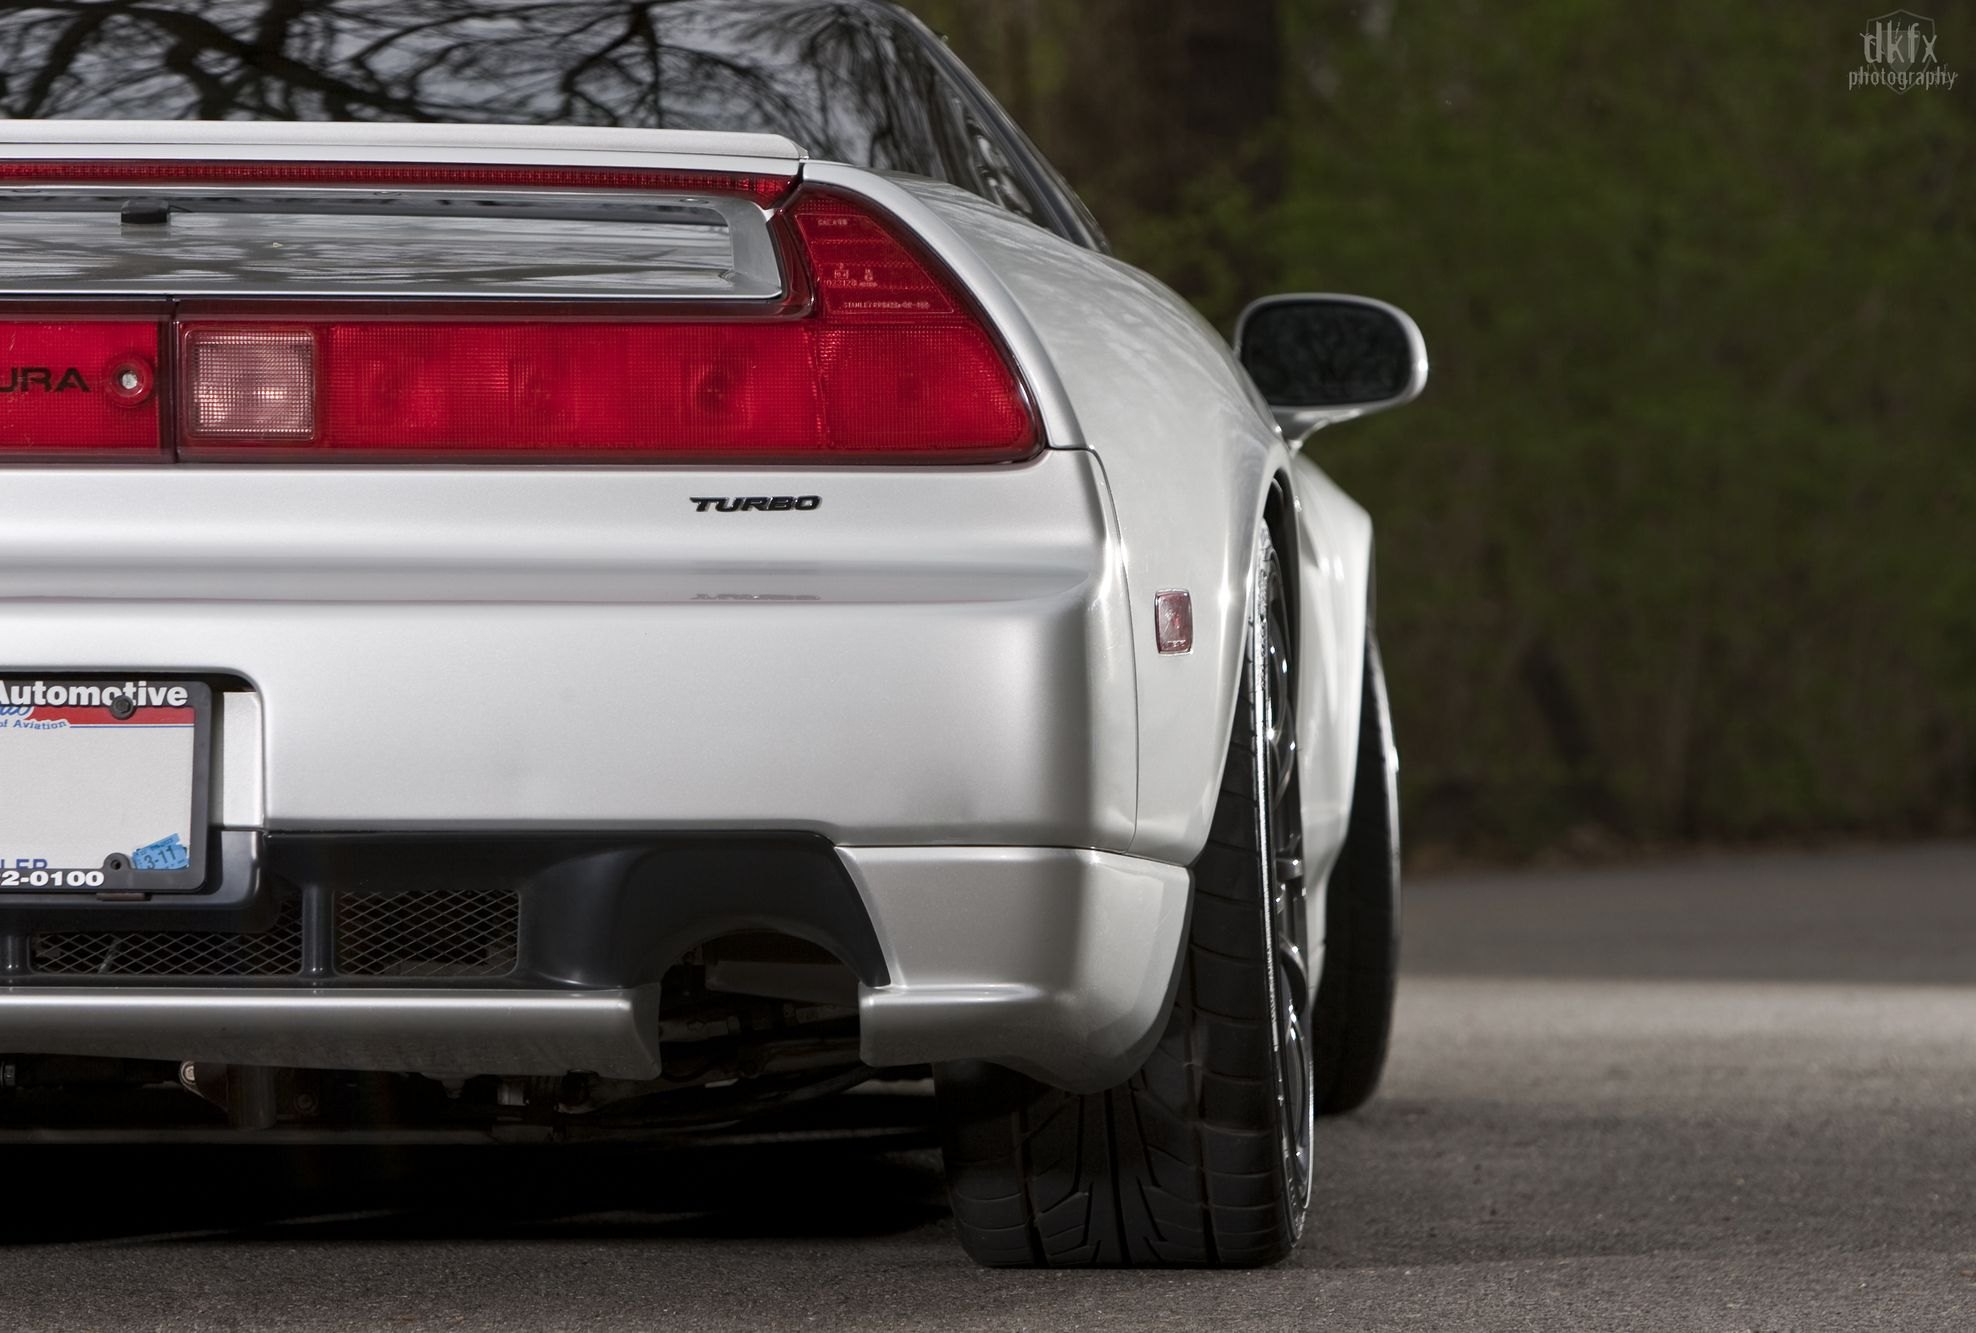 Aftermarket Rear Diffuser on Gray Acura NSX Turbo - Photo by dan kinzie